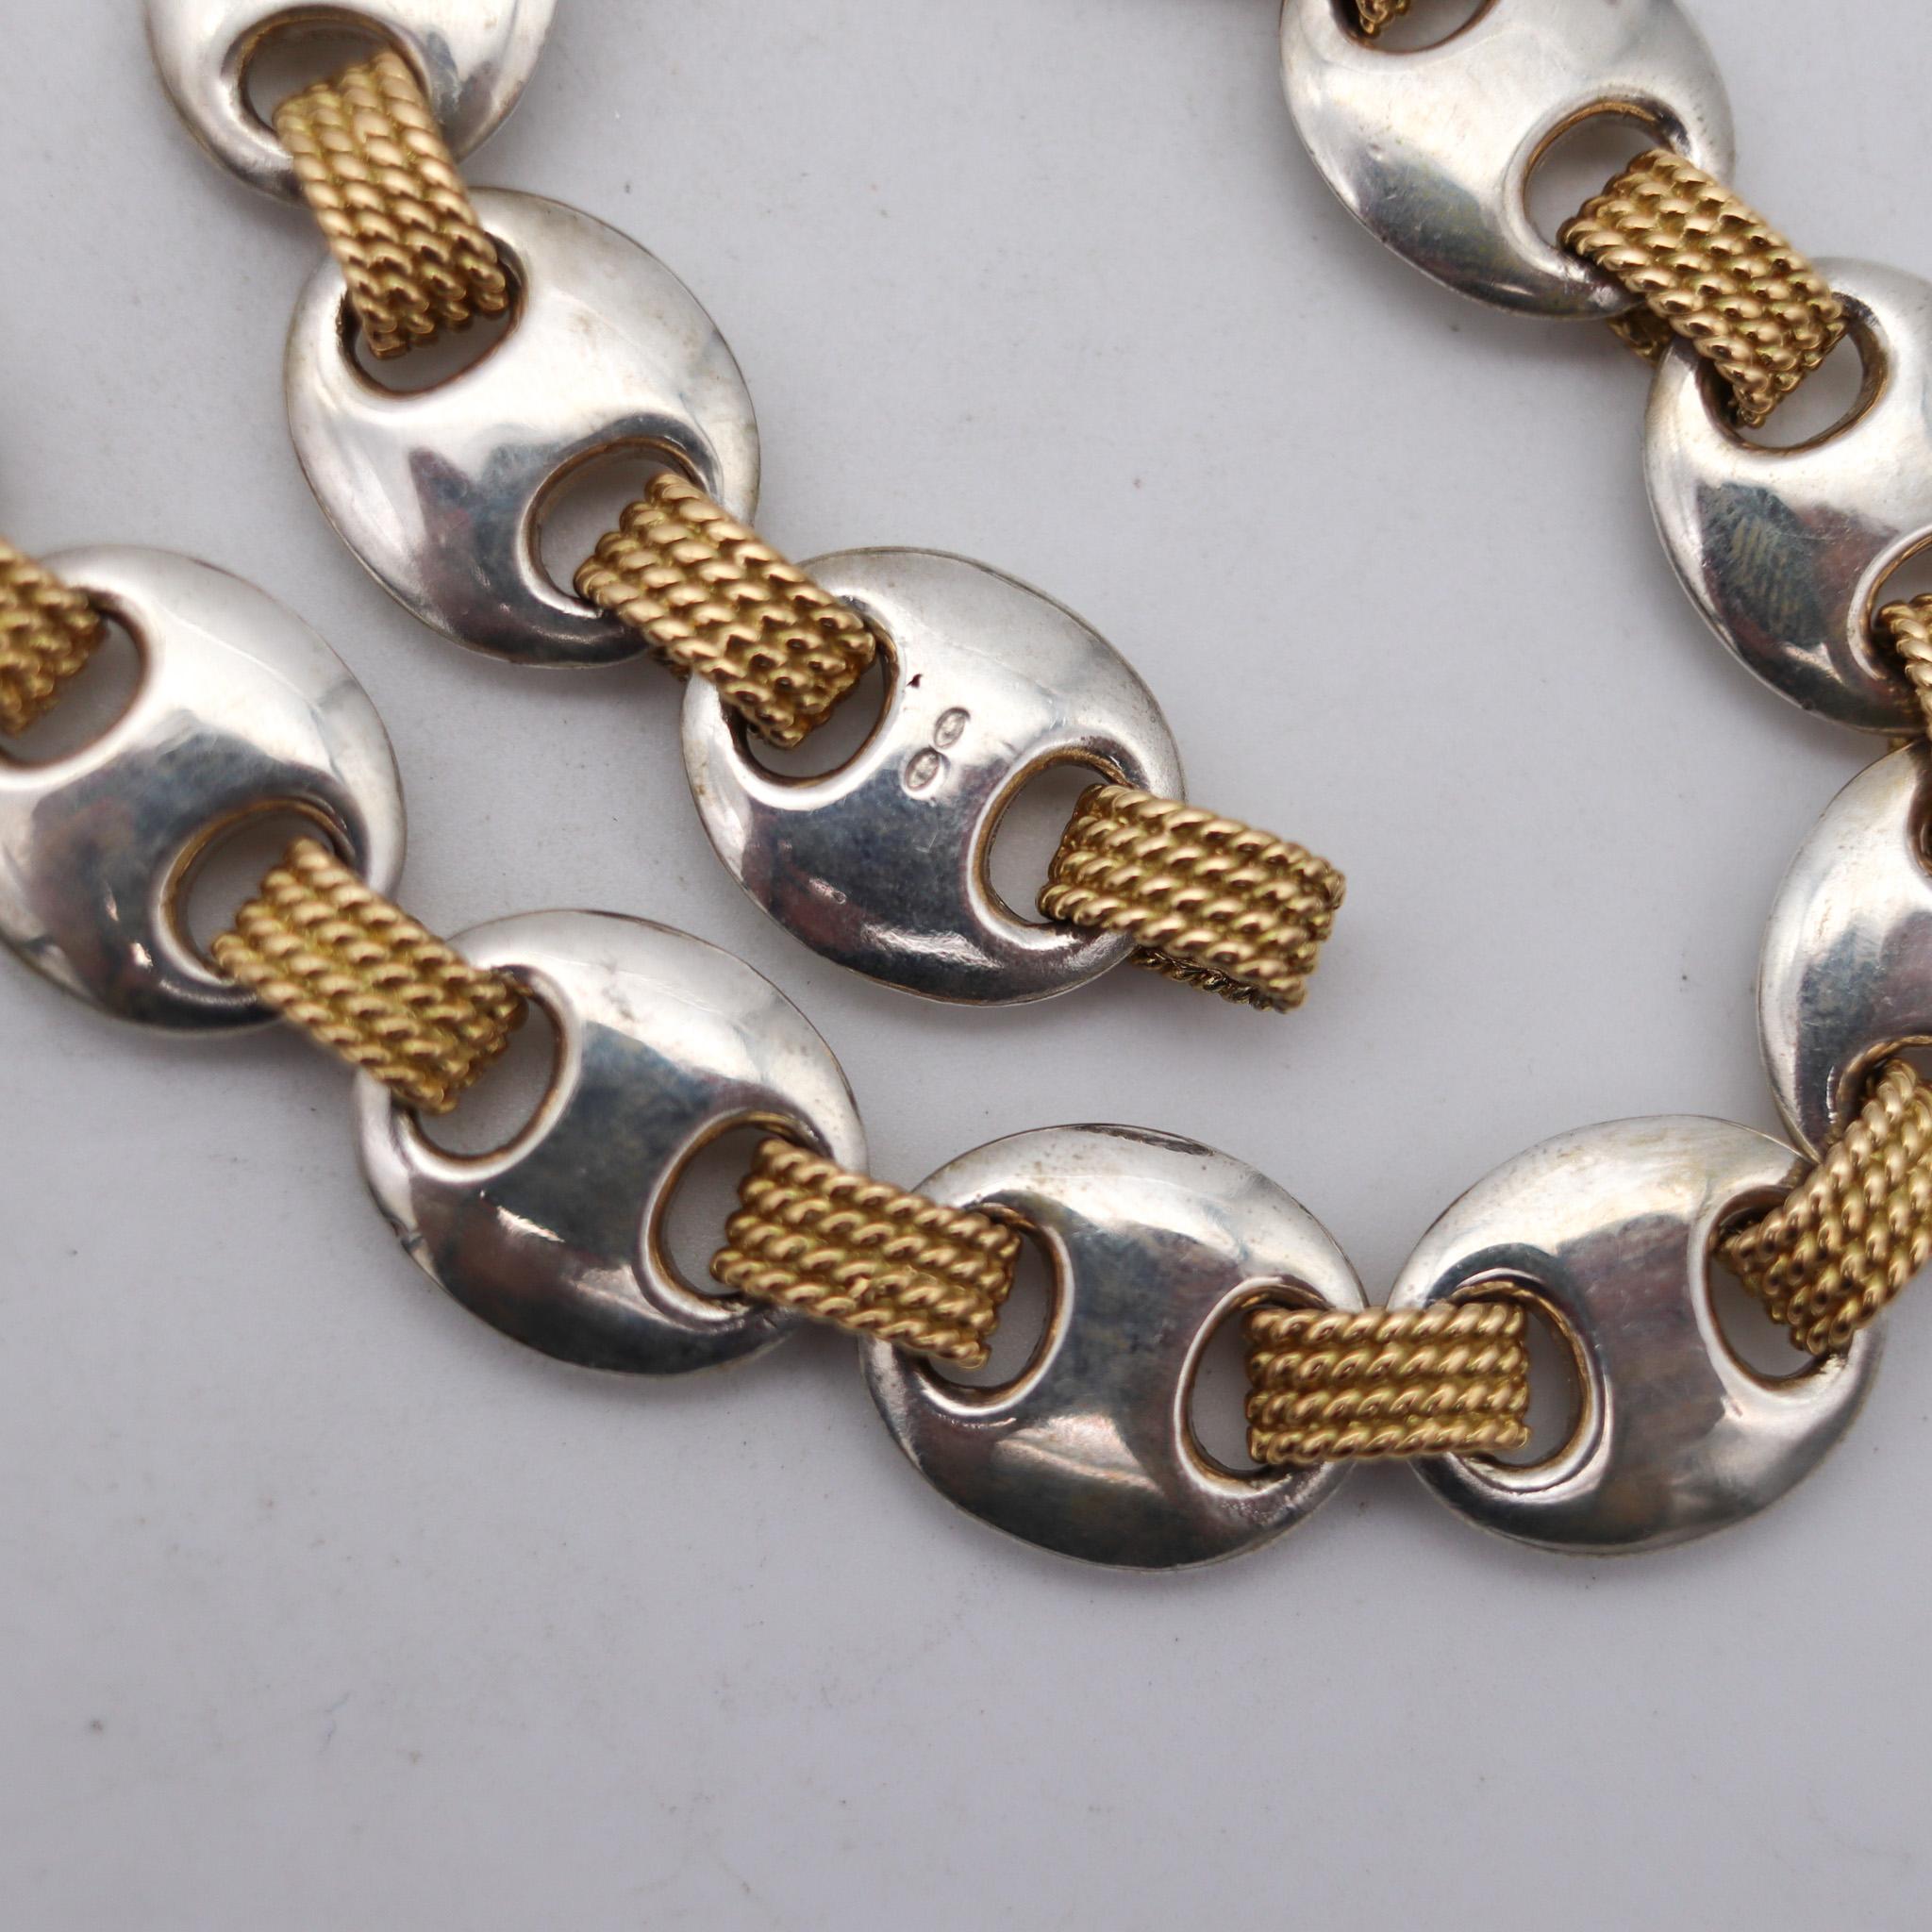 Hermes Paris 1970 Modernist Nautical Links Necklace 18Kt Yellow Gold & Sterling In Excellent Condition For Sale In Miami, FL